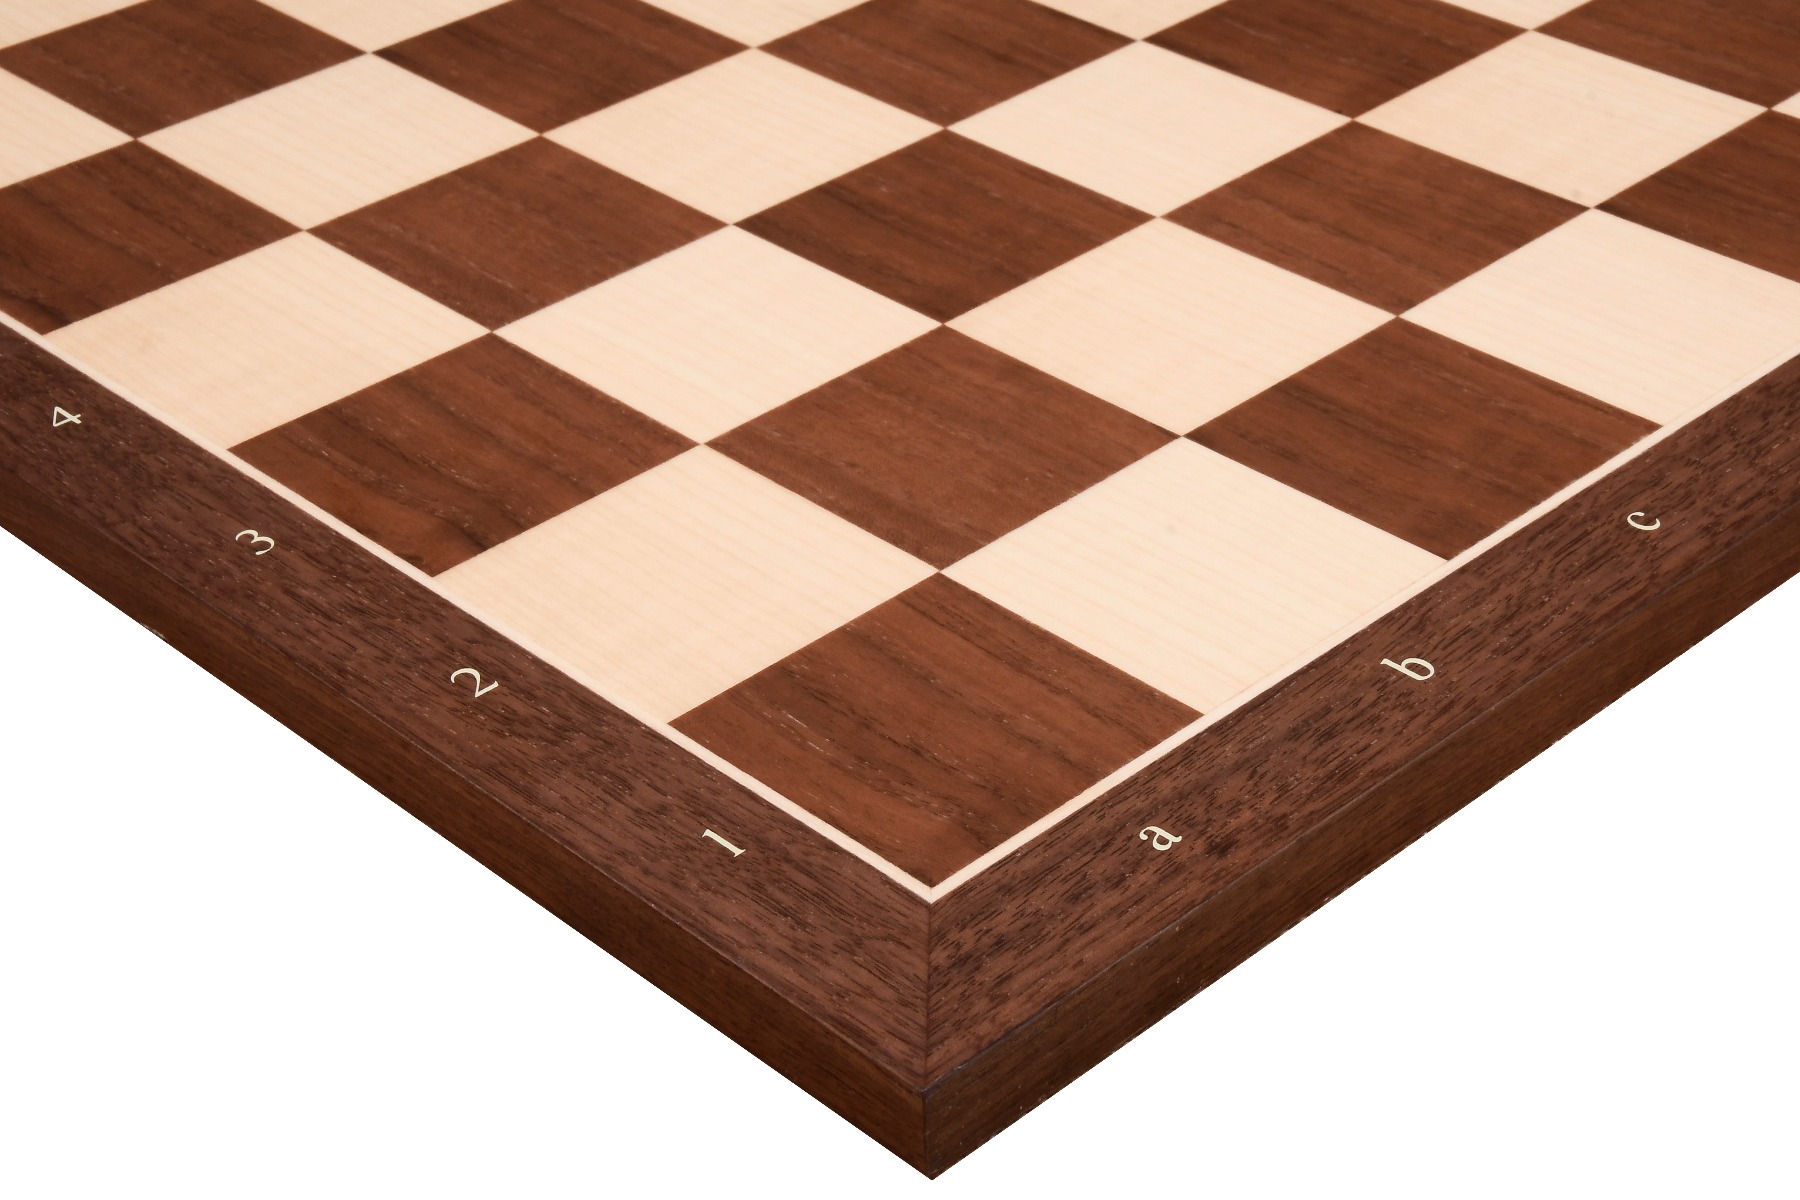 Maple & Mahogany Wooden Chess Board 2.0" With Notation 